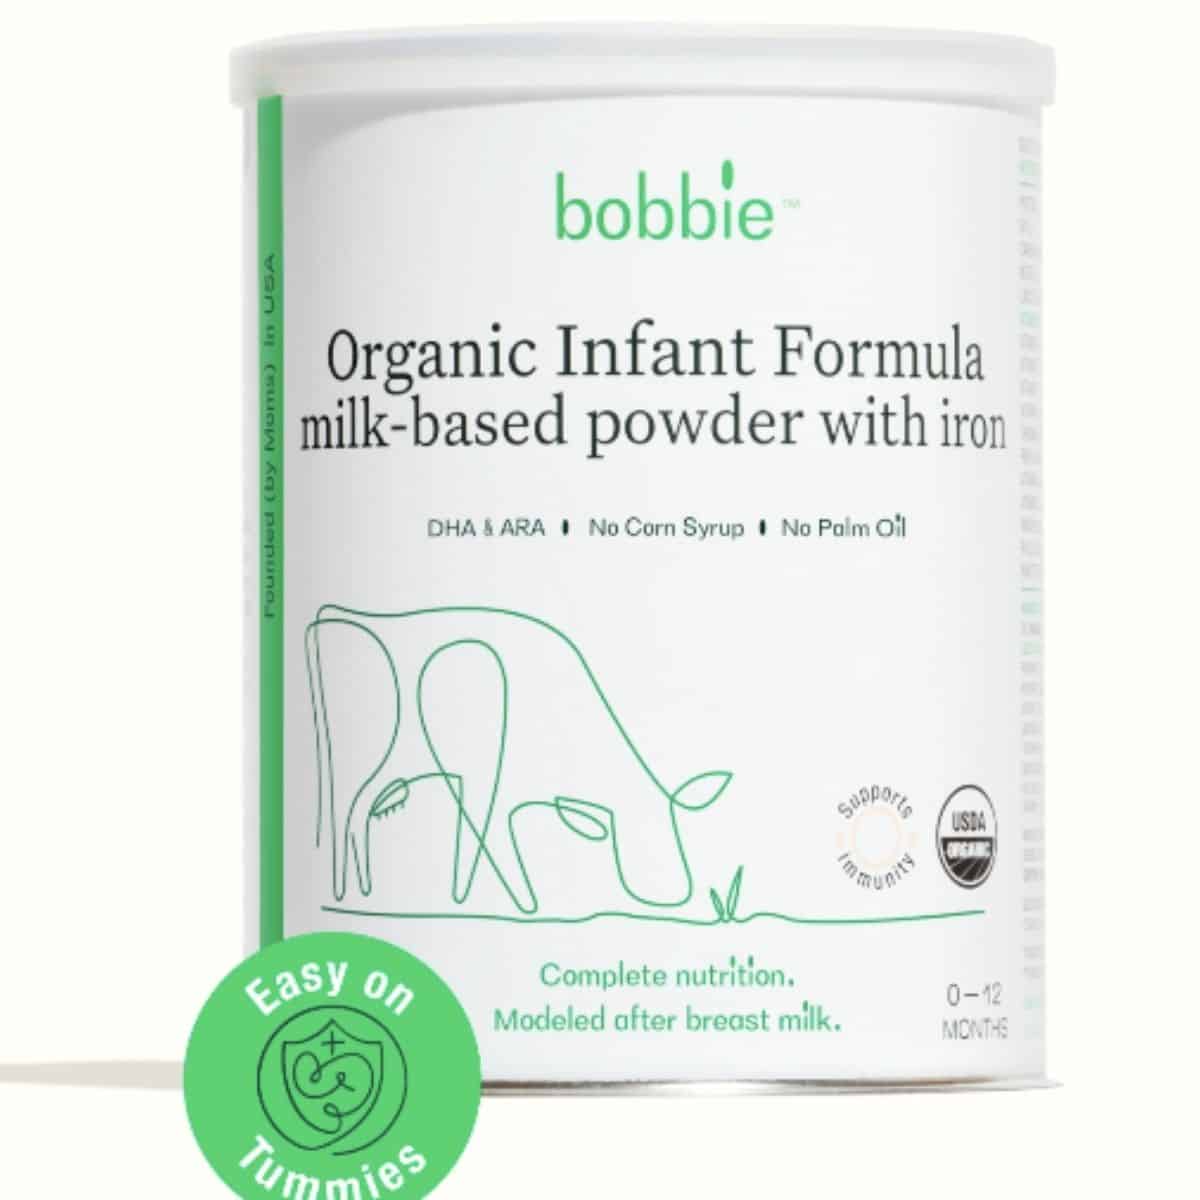 Can of white and green booby formula for baby.